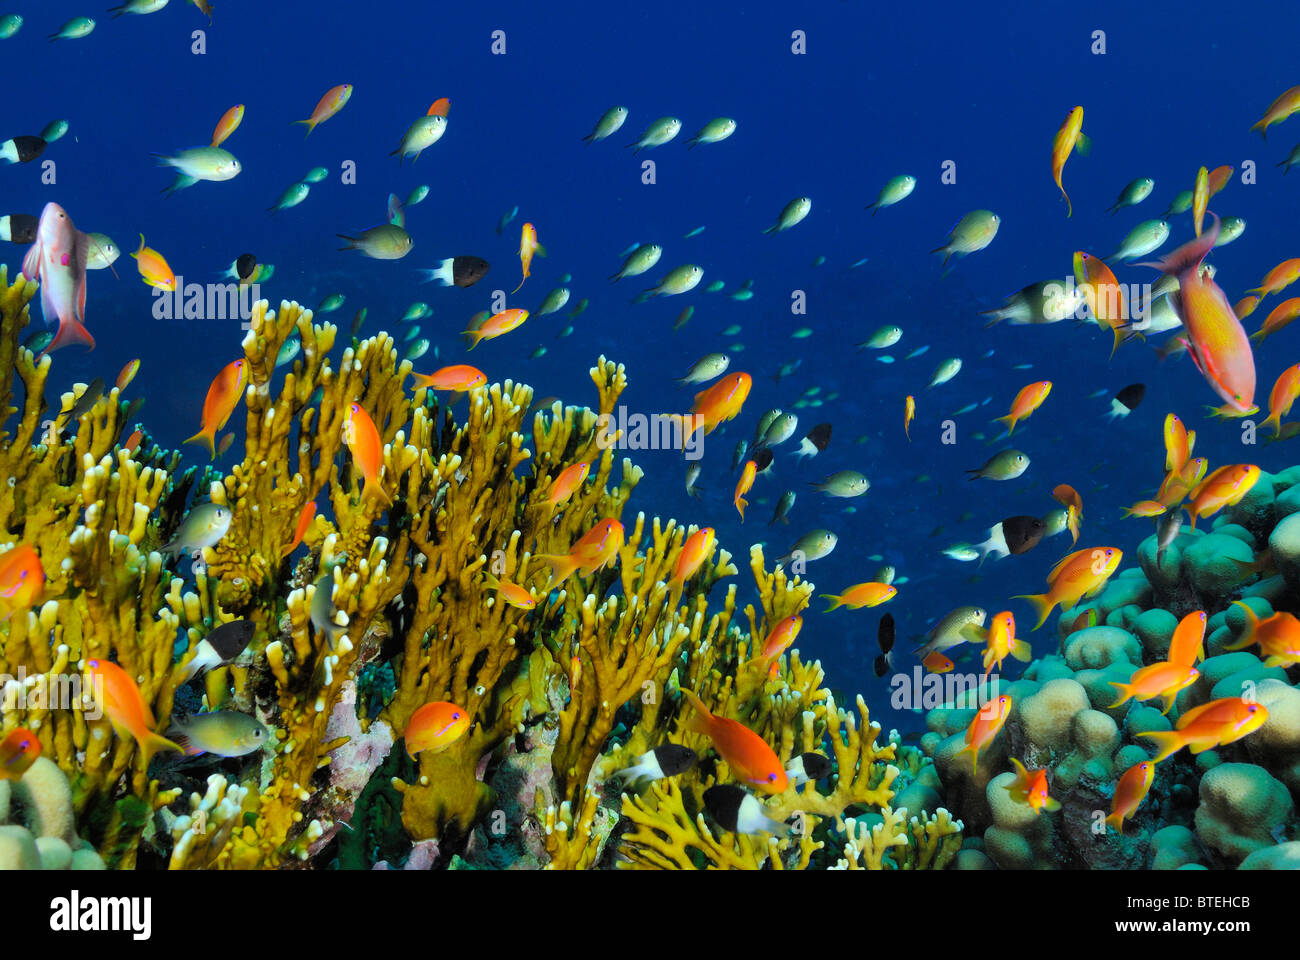 Colony of fire coral growing off Hamata coast, Egypt, Red Sea Stock Photo